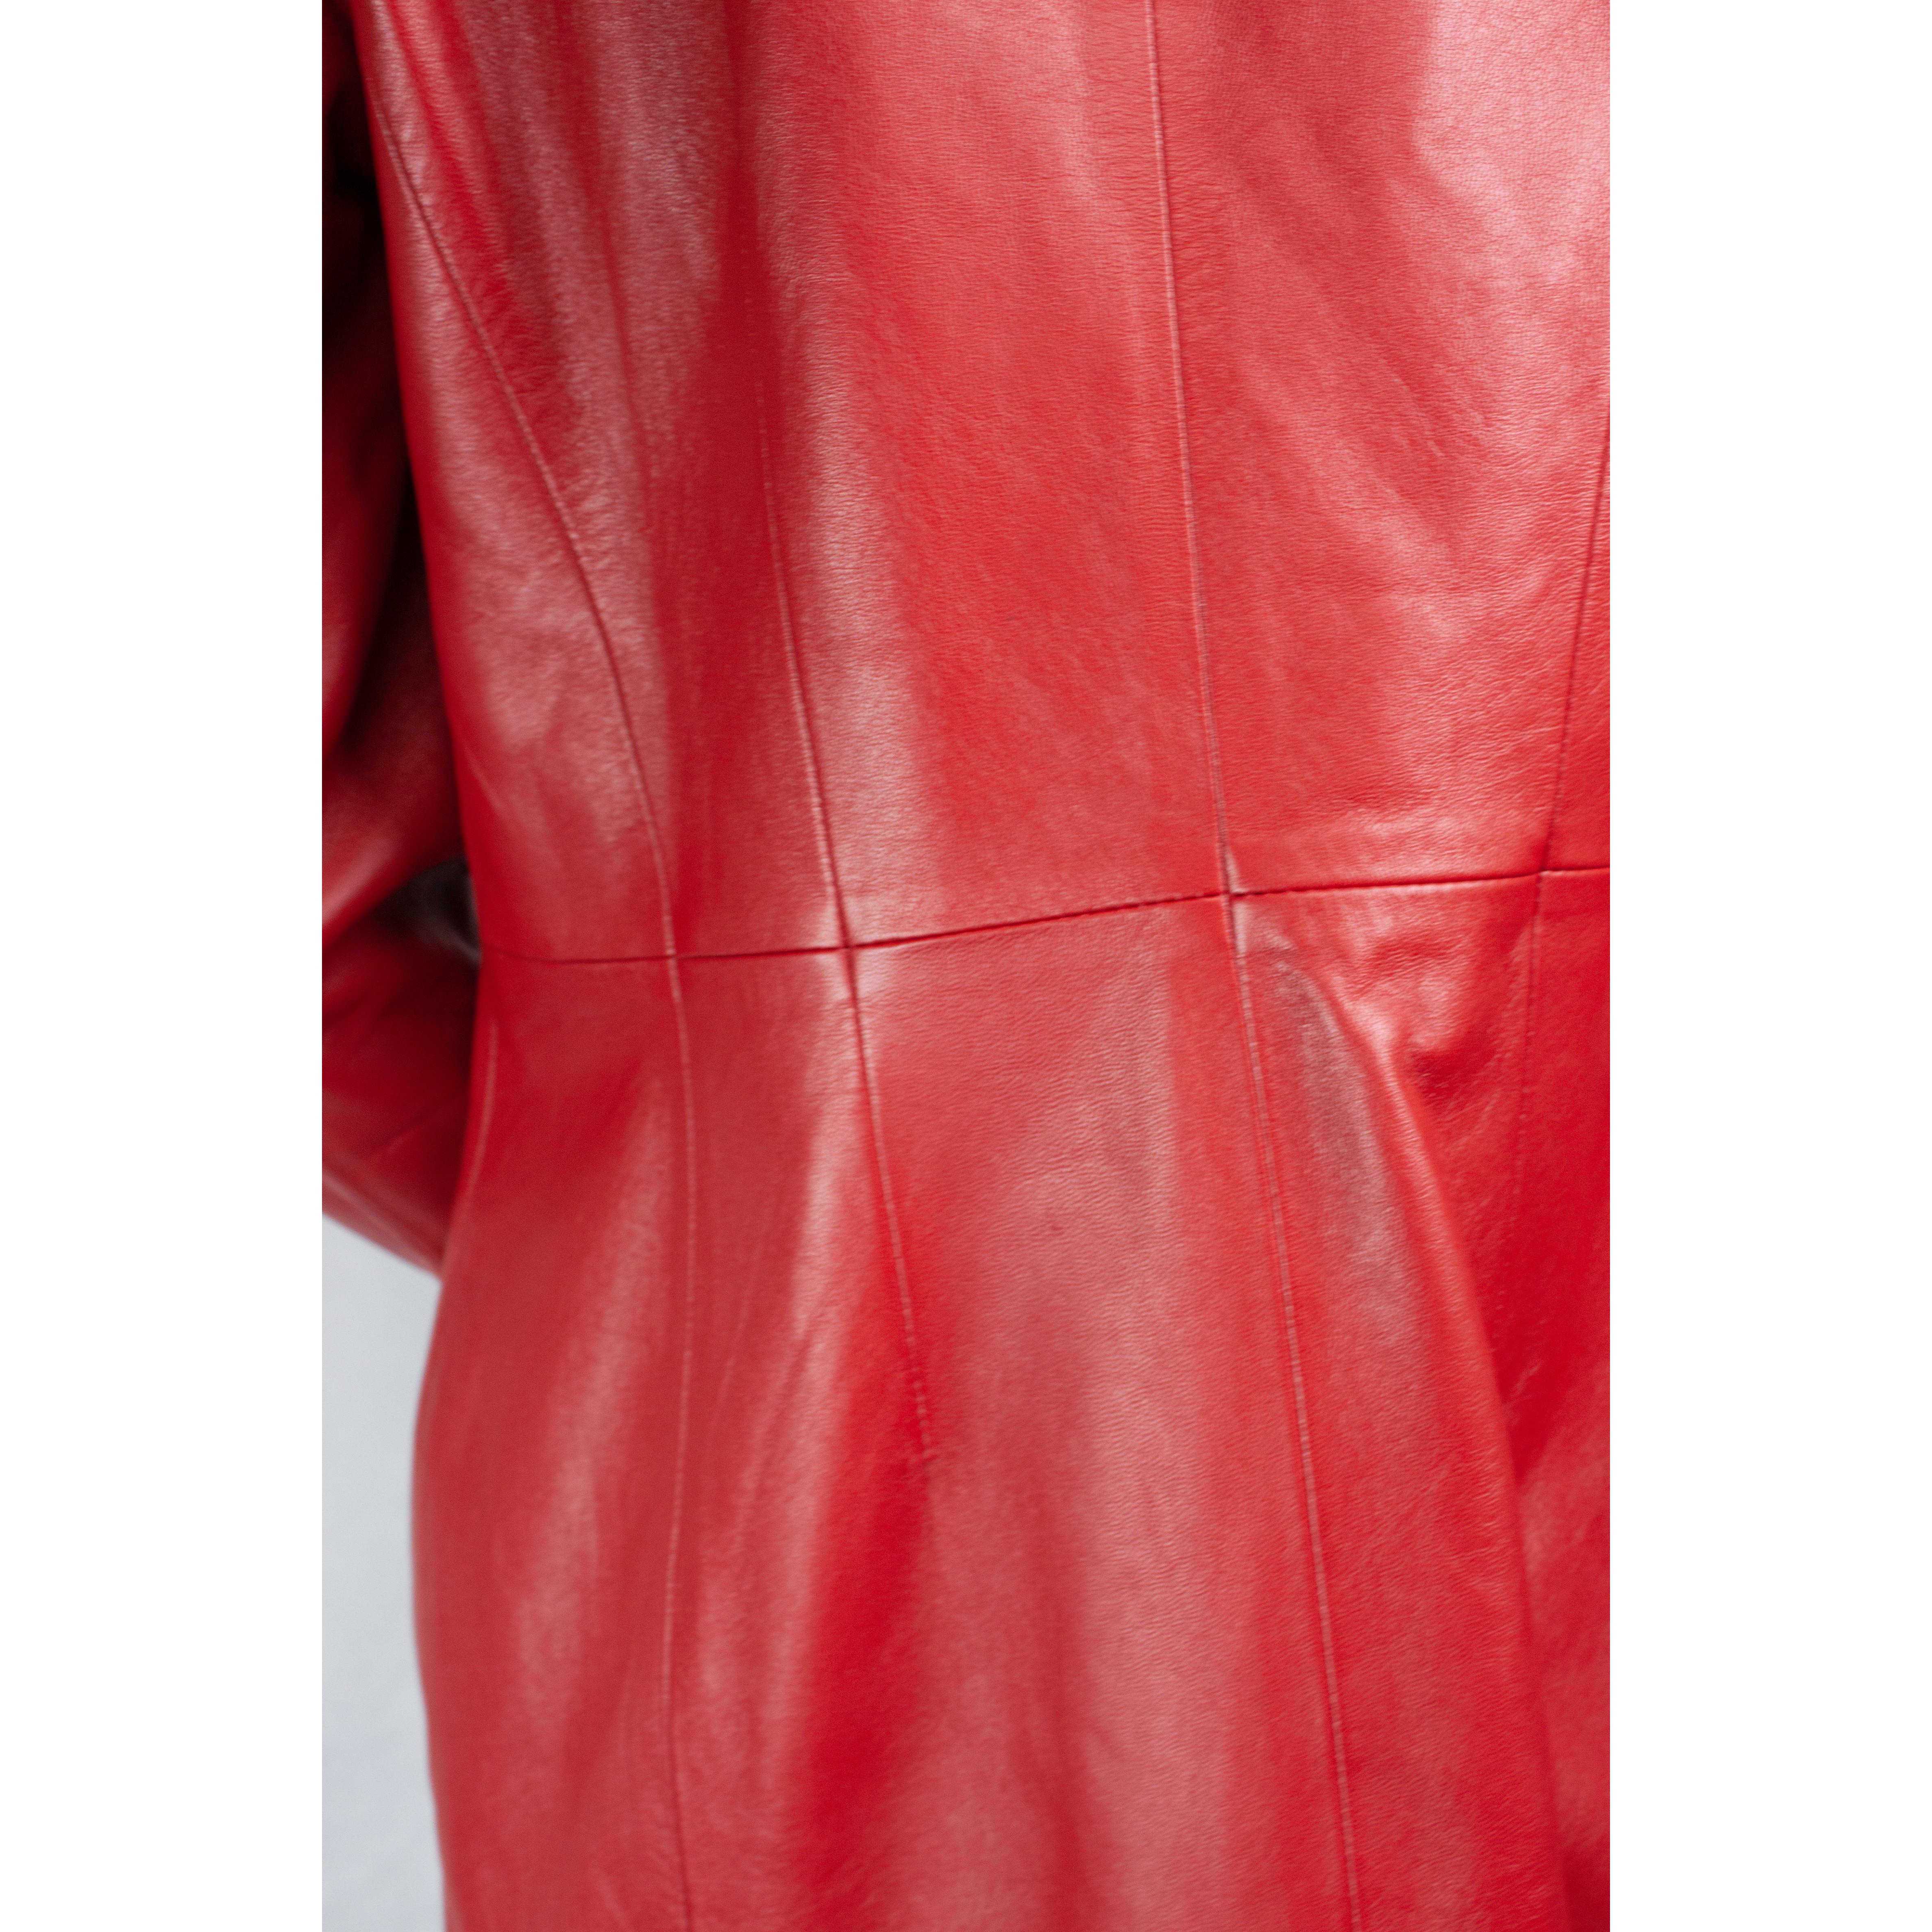 Women's Louis Feraud red and white tailored leather jacket.circa 1980s For Sale